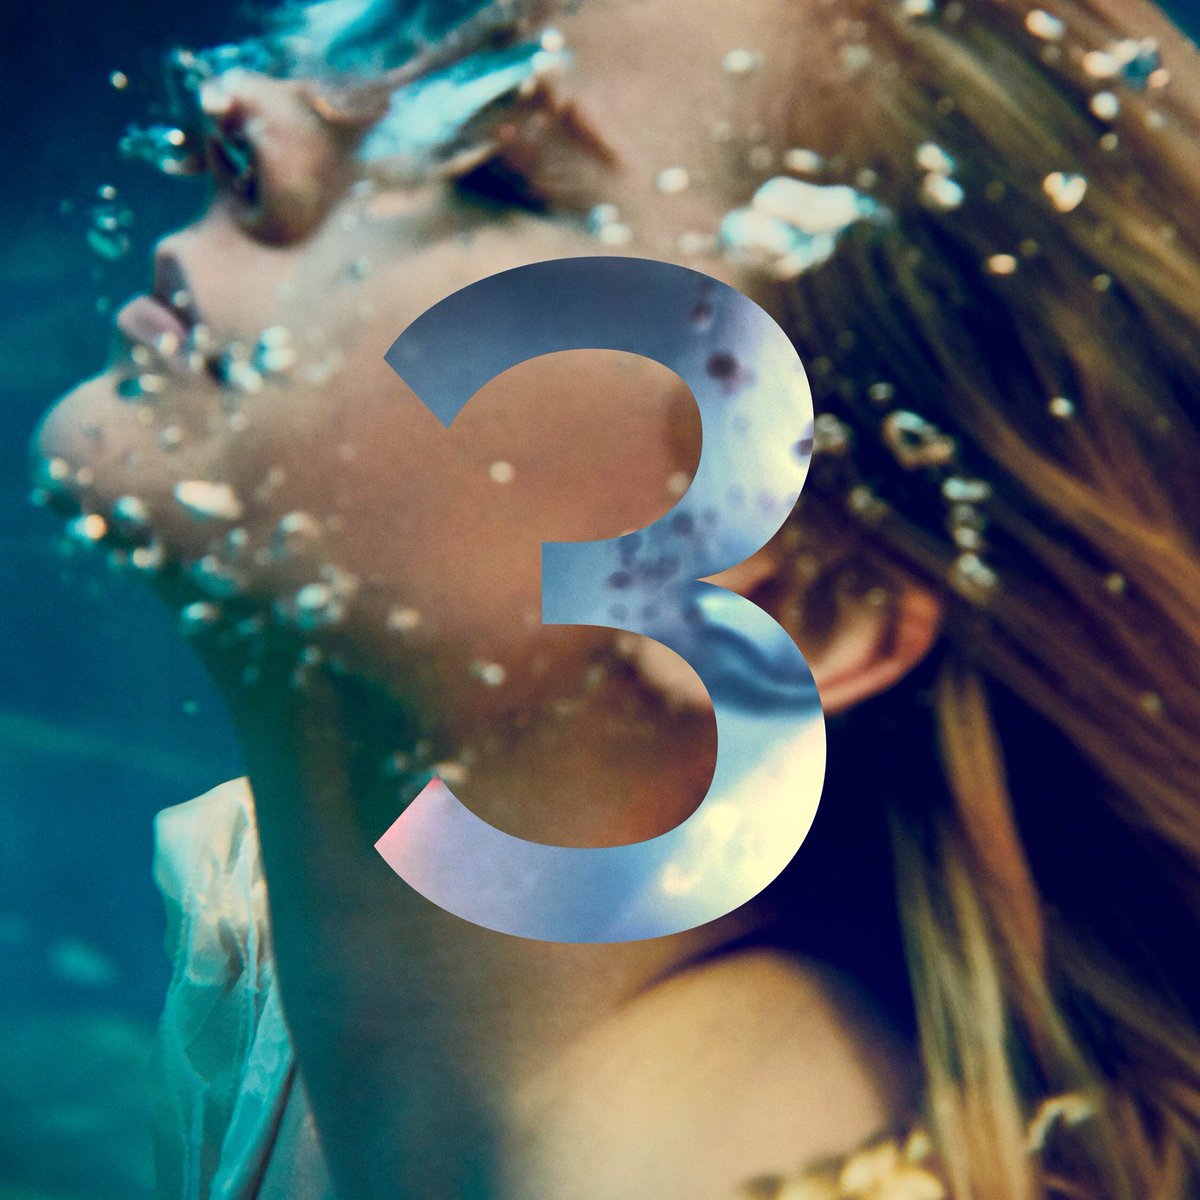 Only three more days to go ???? #headabovewater https://t.co/vw3w3XJuNS